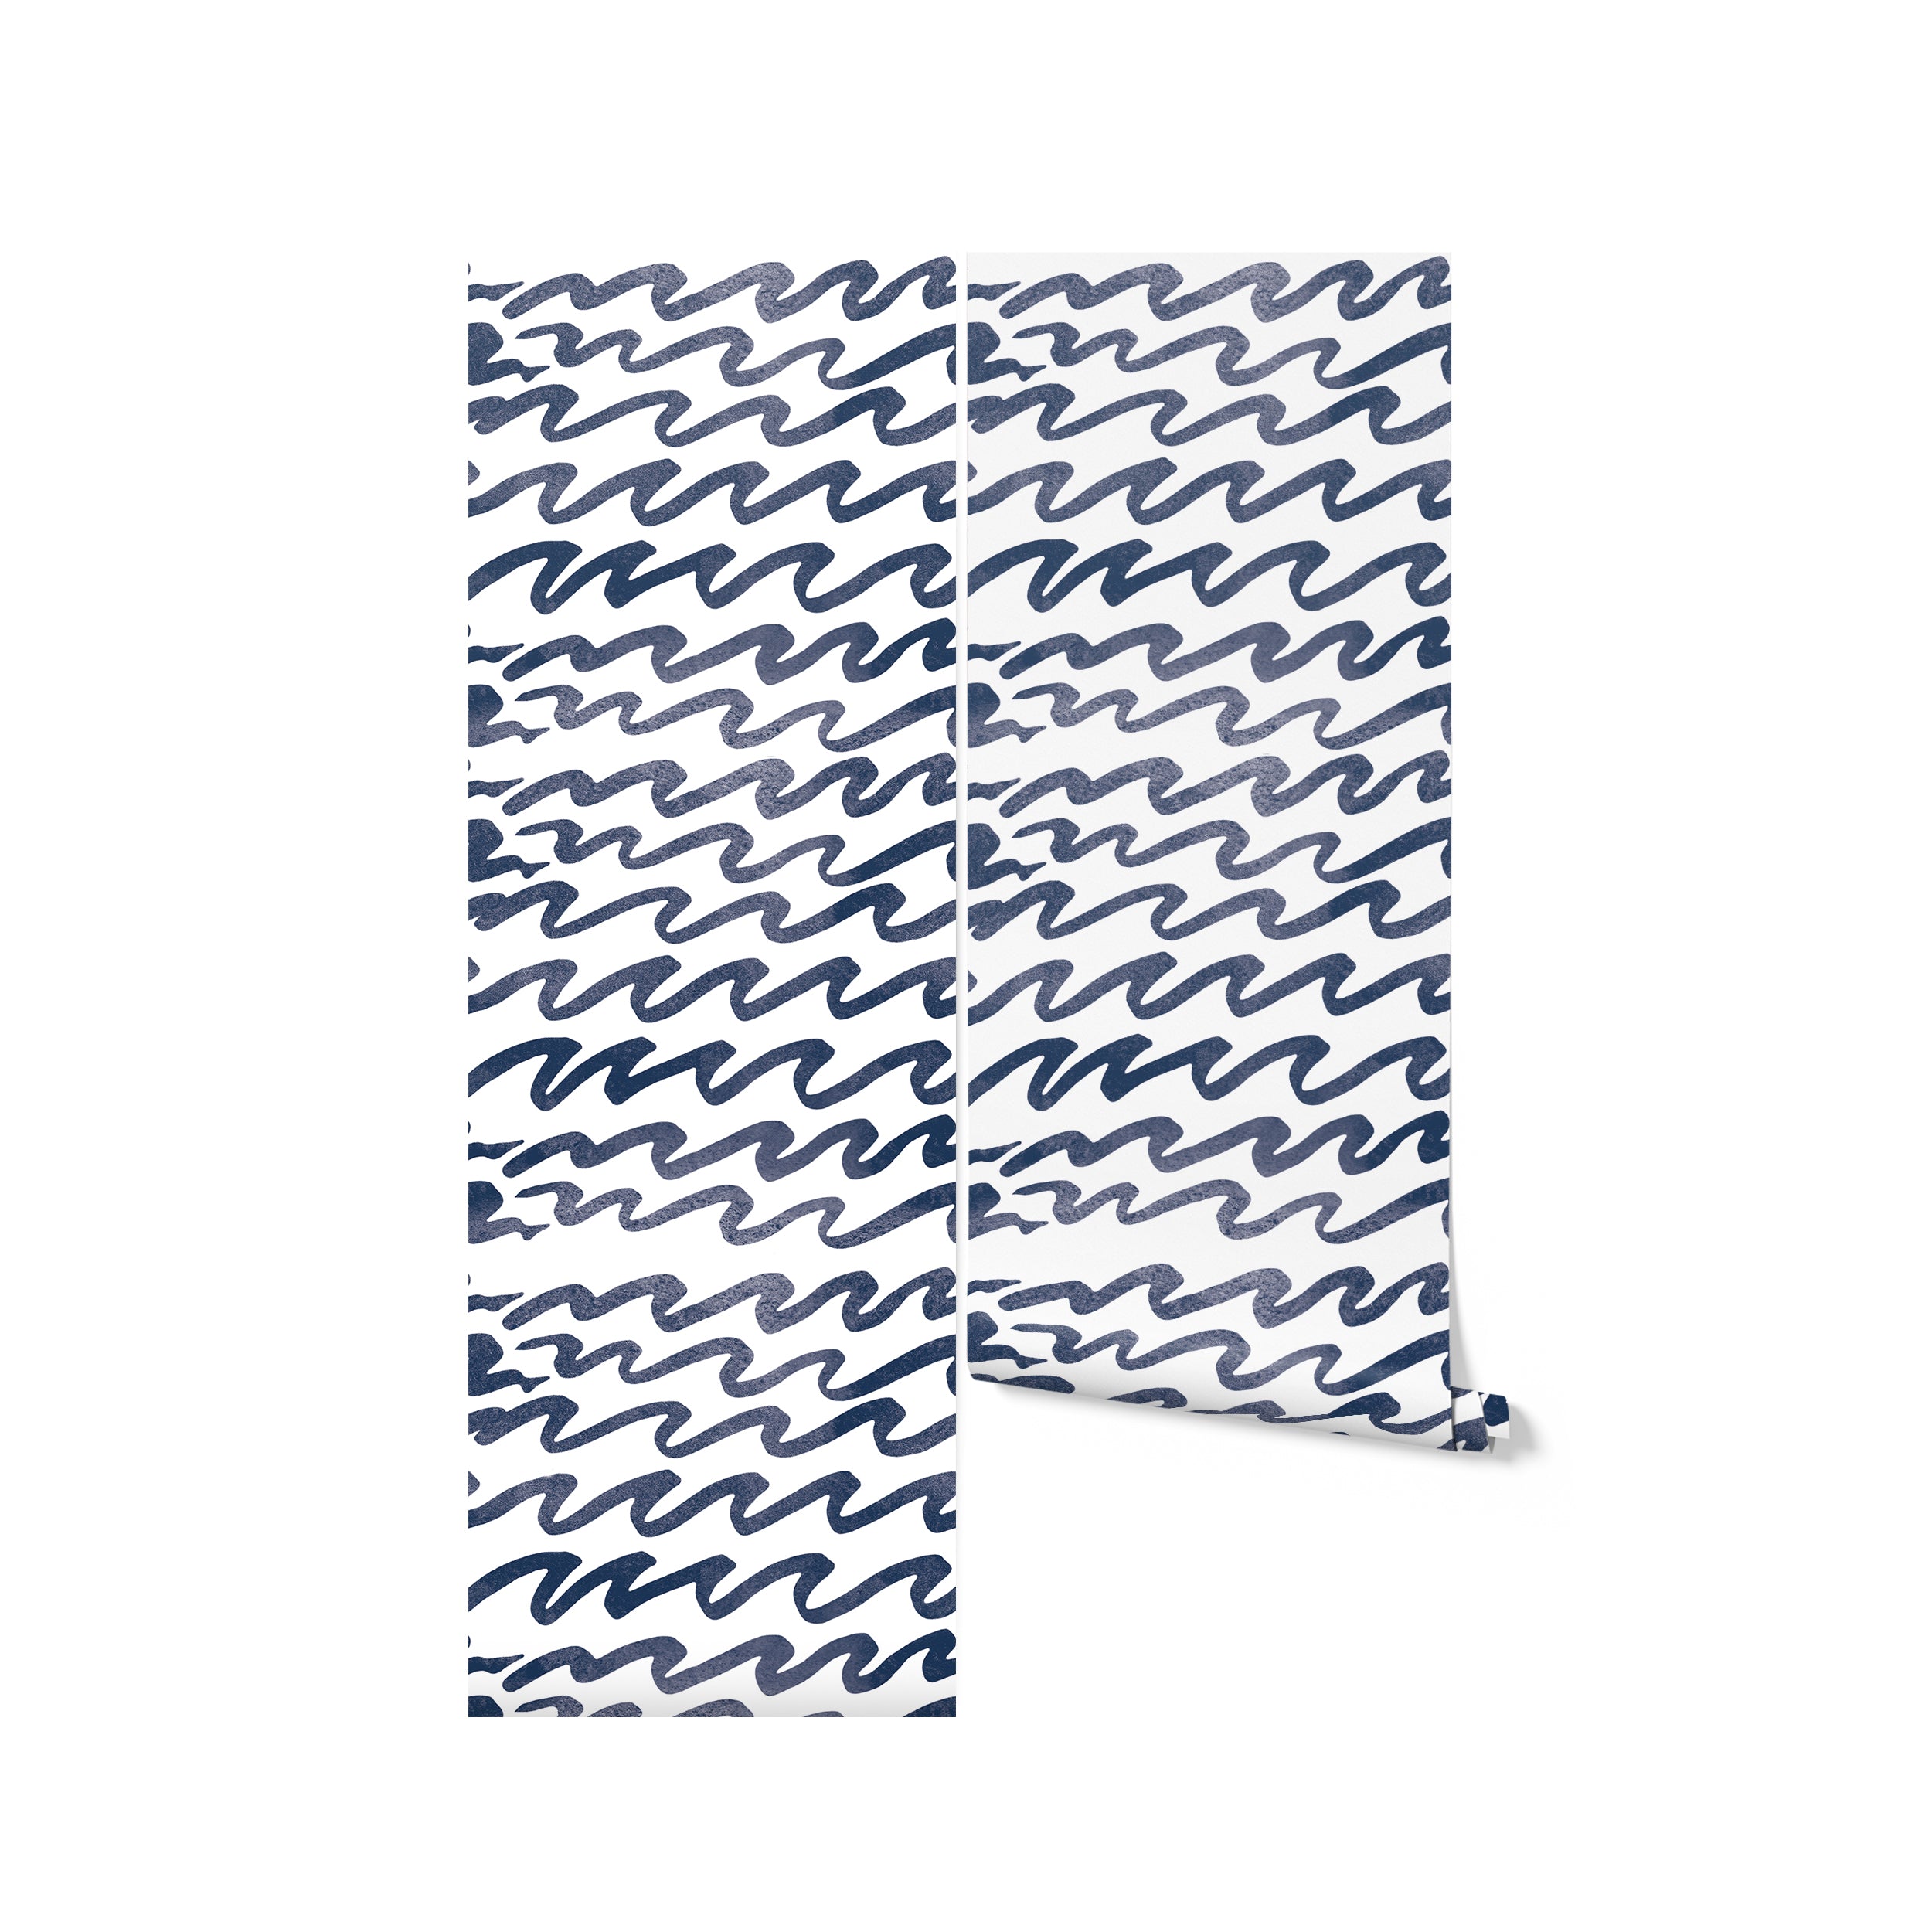 Two rolls of Wave Wallpaper - Navy Wallpaper displayed side by side, highlighting the striking hand-painted navy blue wave patterns on a white background.